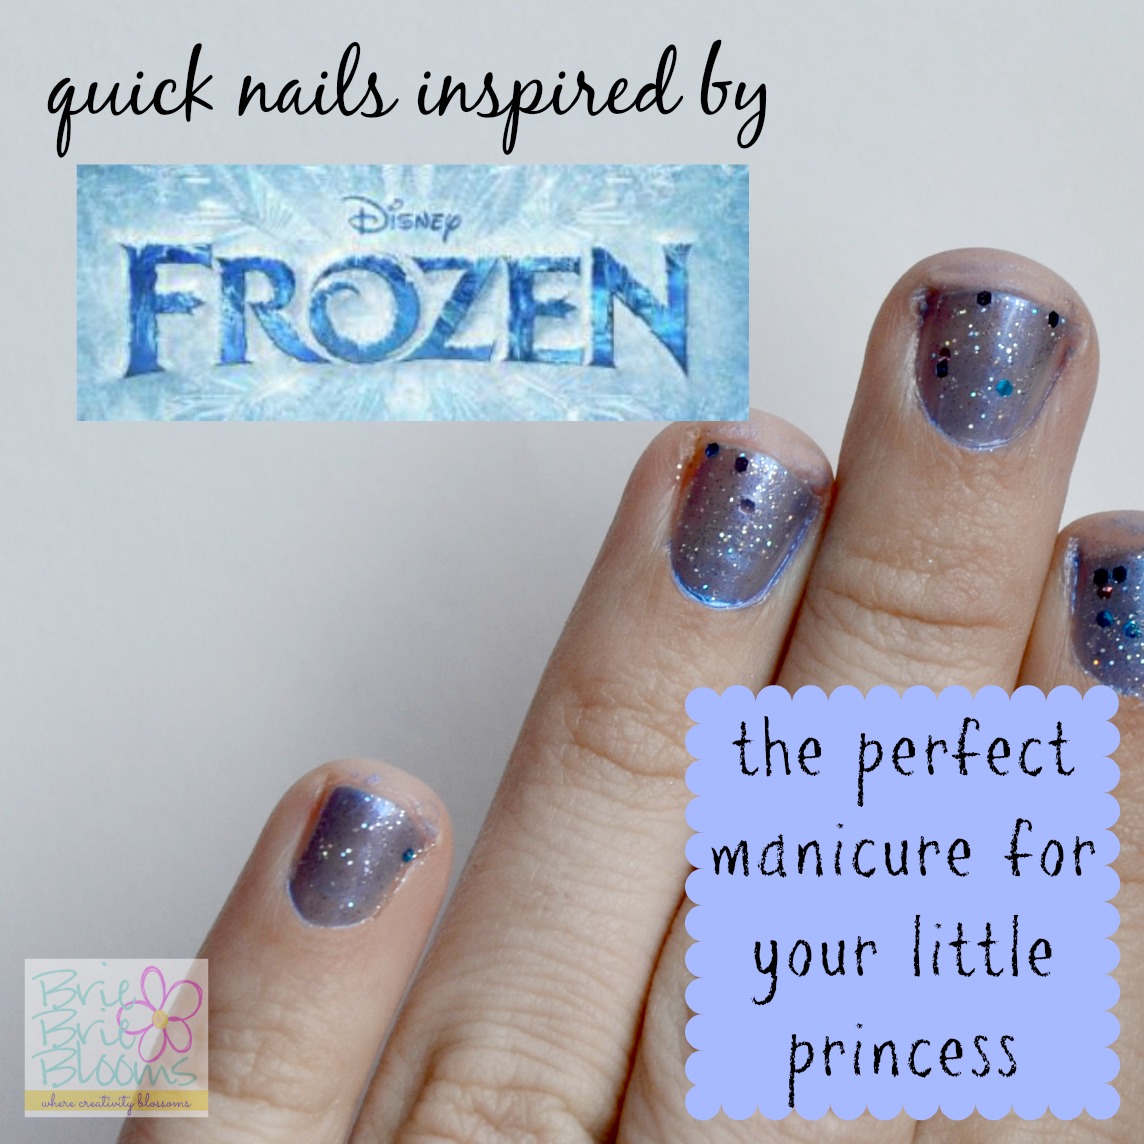 FROZEN inspired nails